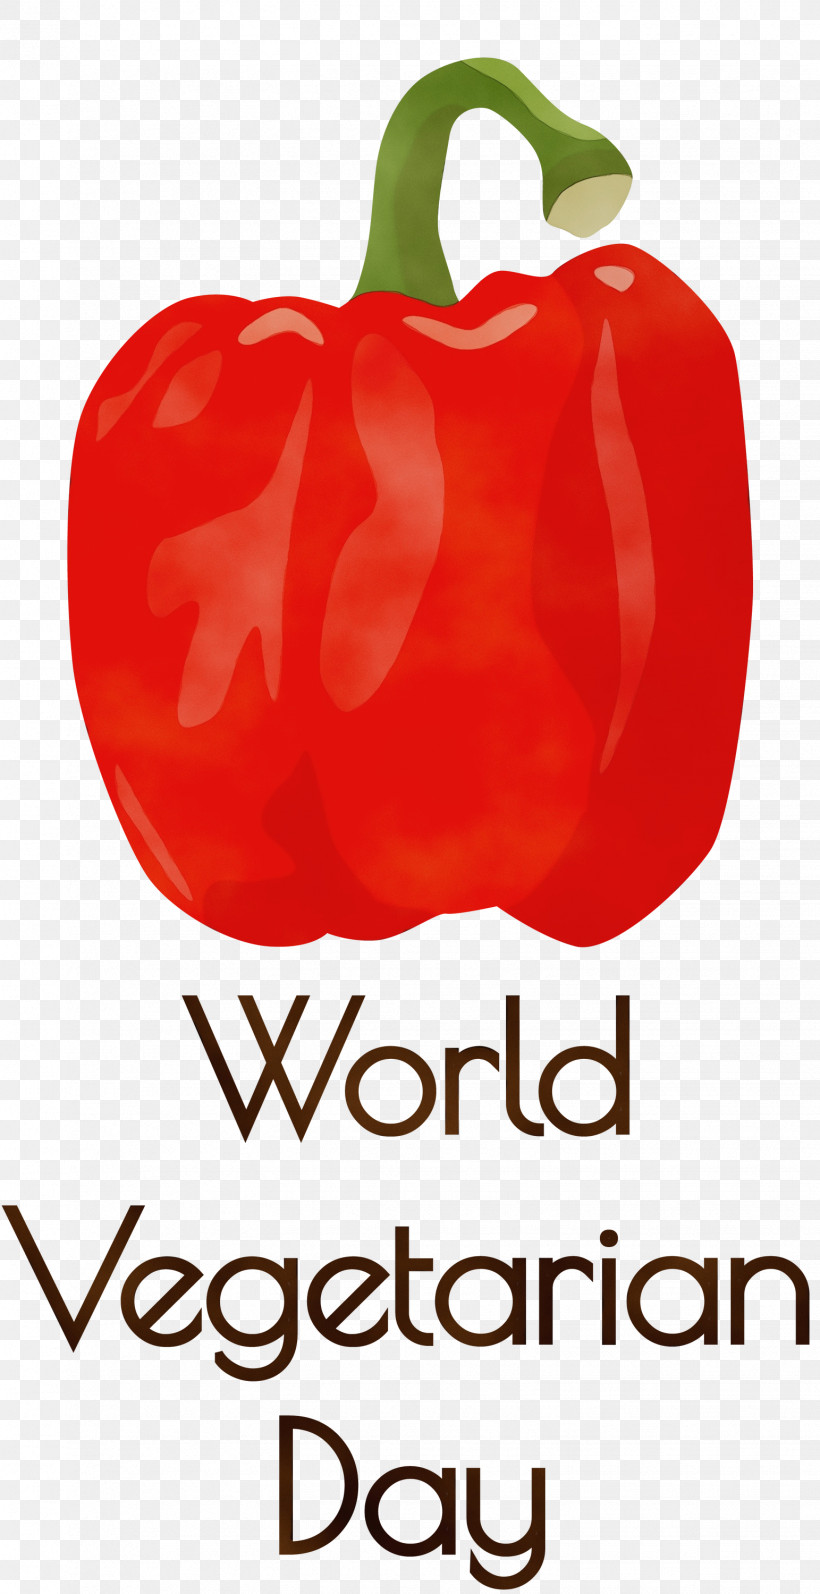 Bell Pepper Habanero Chili Pepper Paprika, PNG, 1543x3000px, World Vegetarian Day, Bell Pepper, Chili Pepper, Habanero, Local Food Download Free